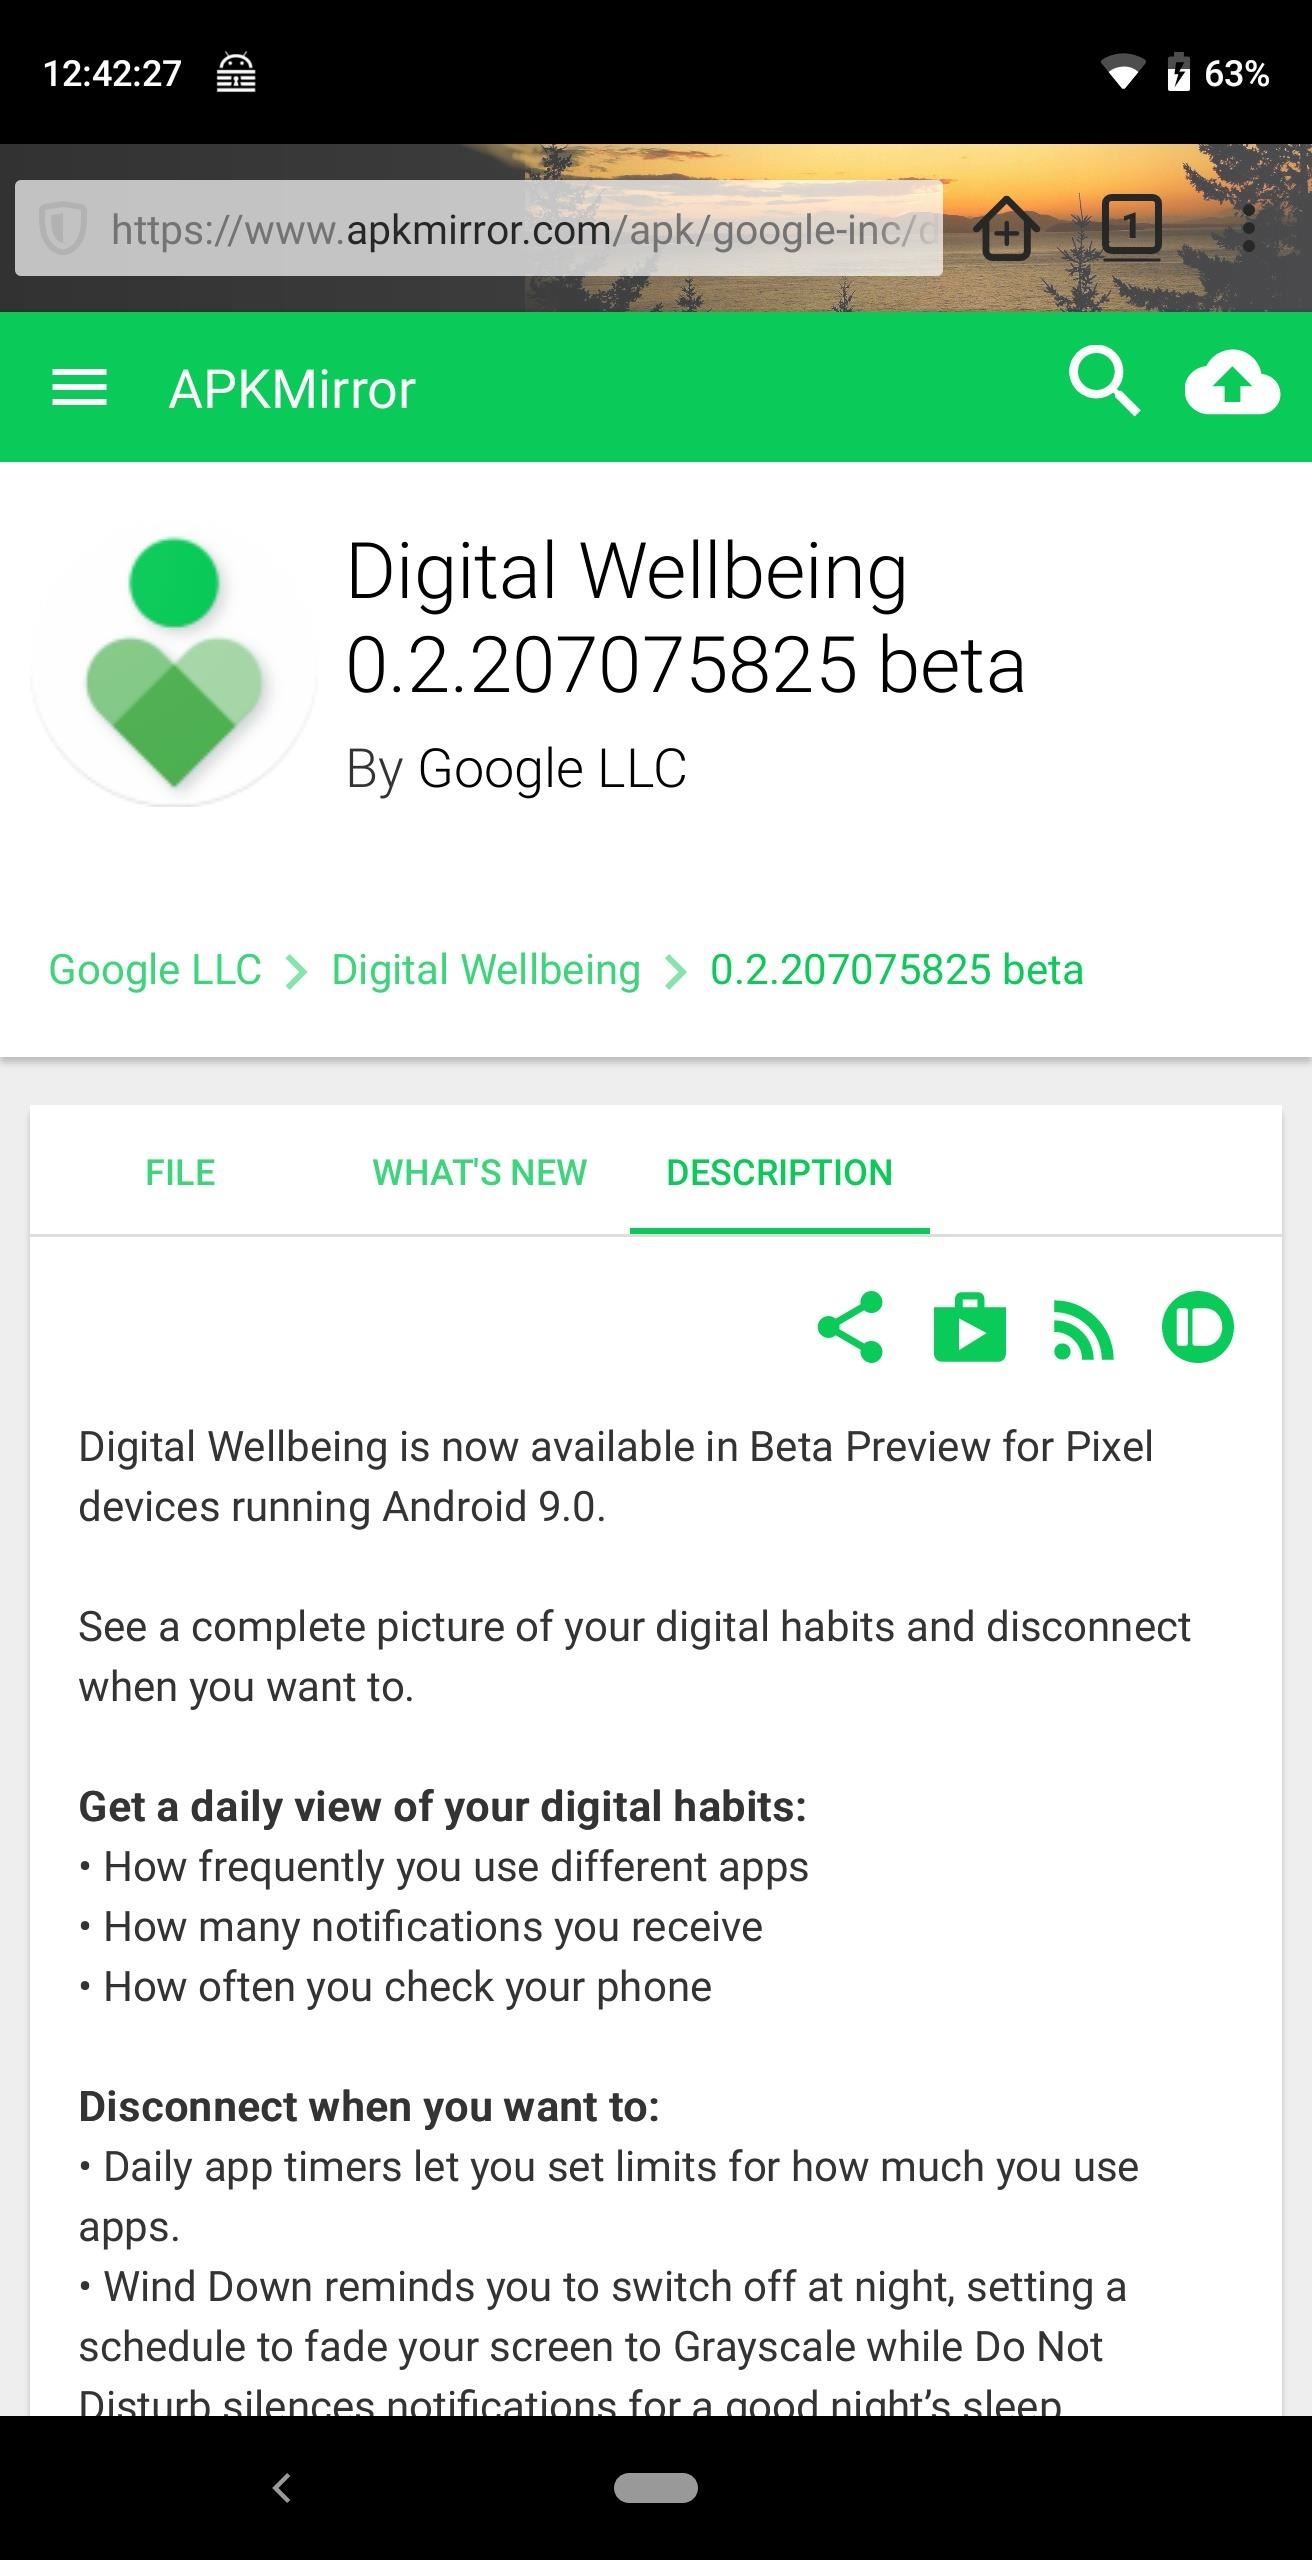 How to Get Digital Wellbeing in Android 9.0 Pie on Your Pixel Right Now